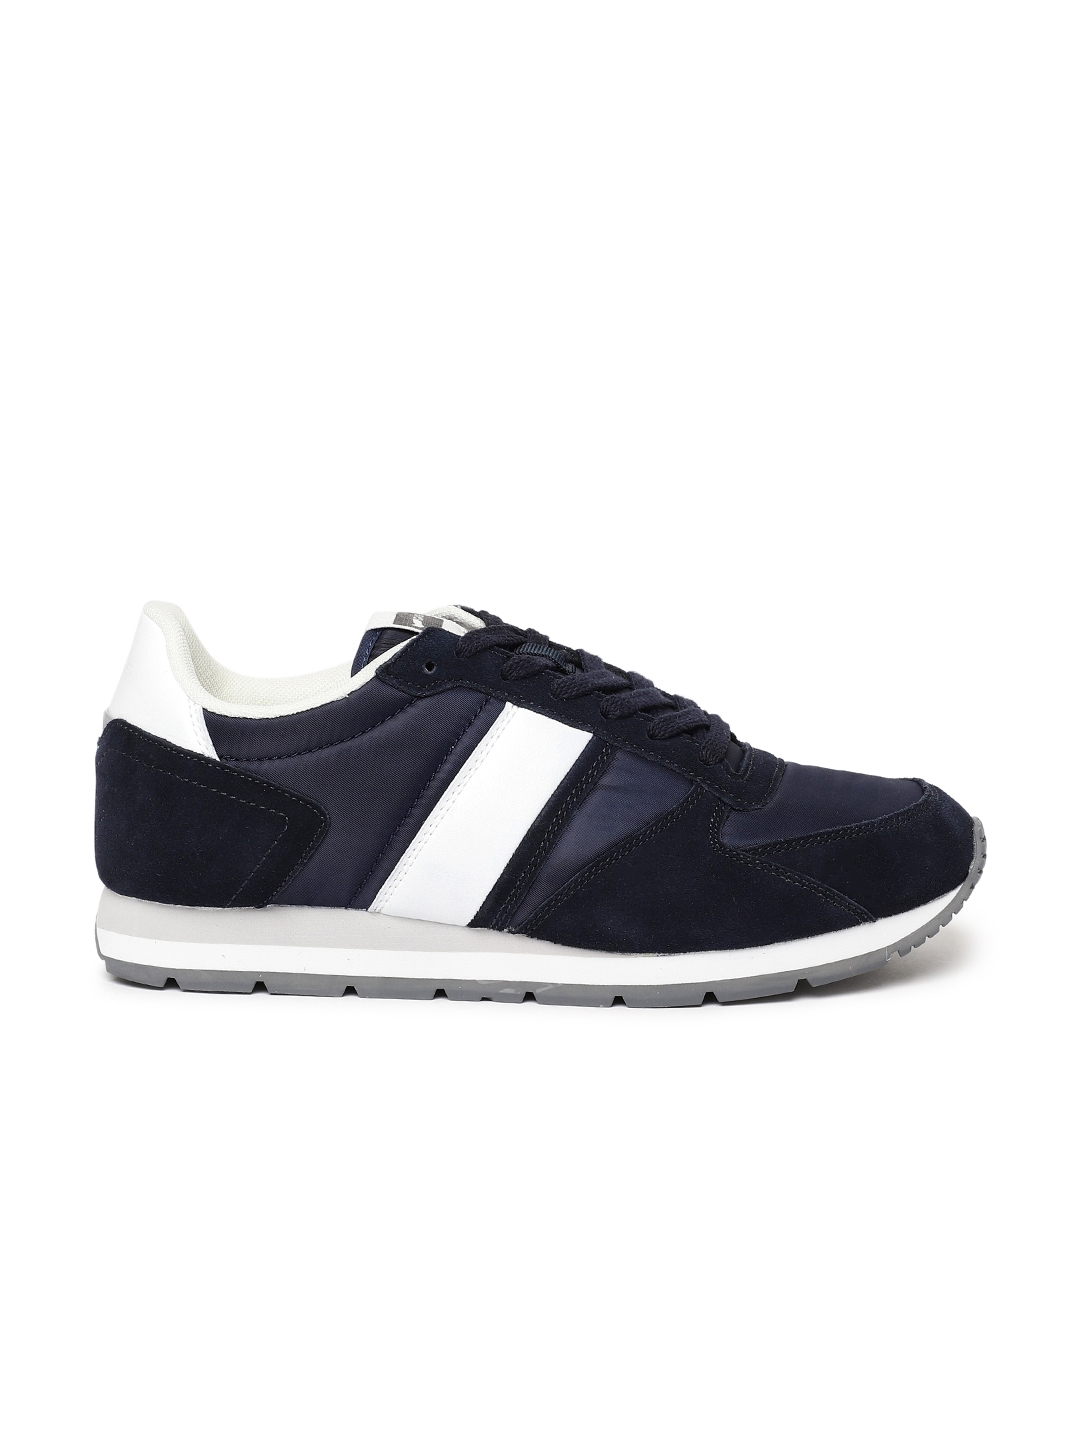 Buy GAS Men Navy Blue Sneakers - Casual Shoes for Men 4376347 | Myntra